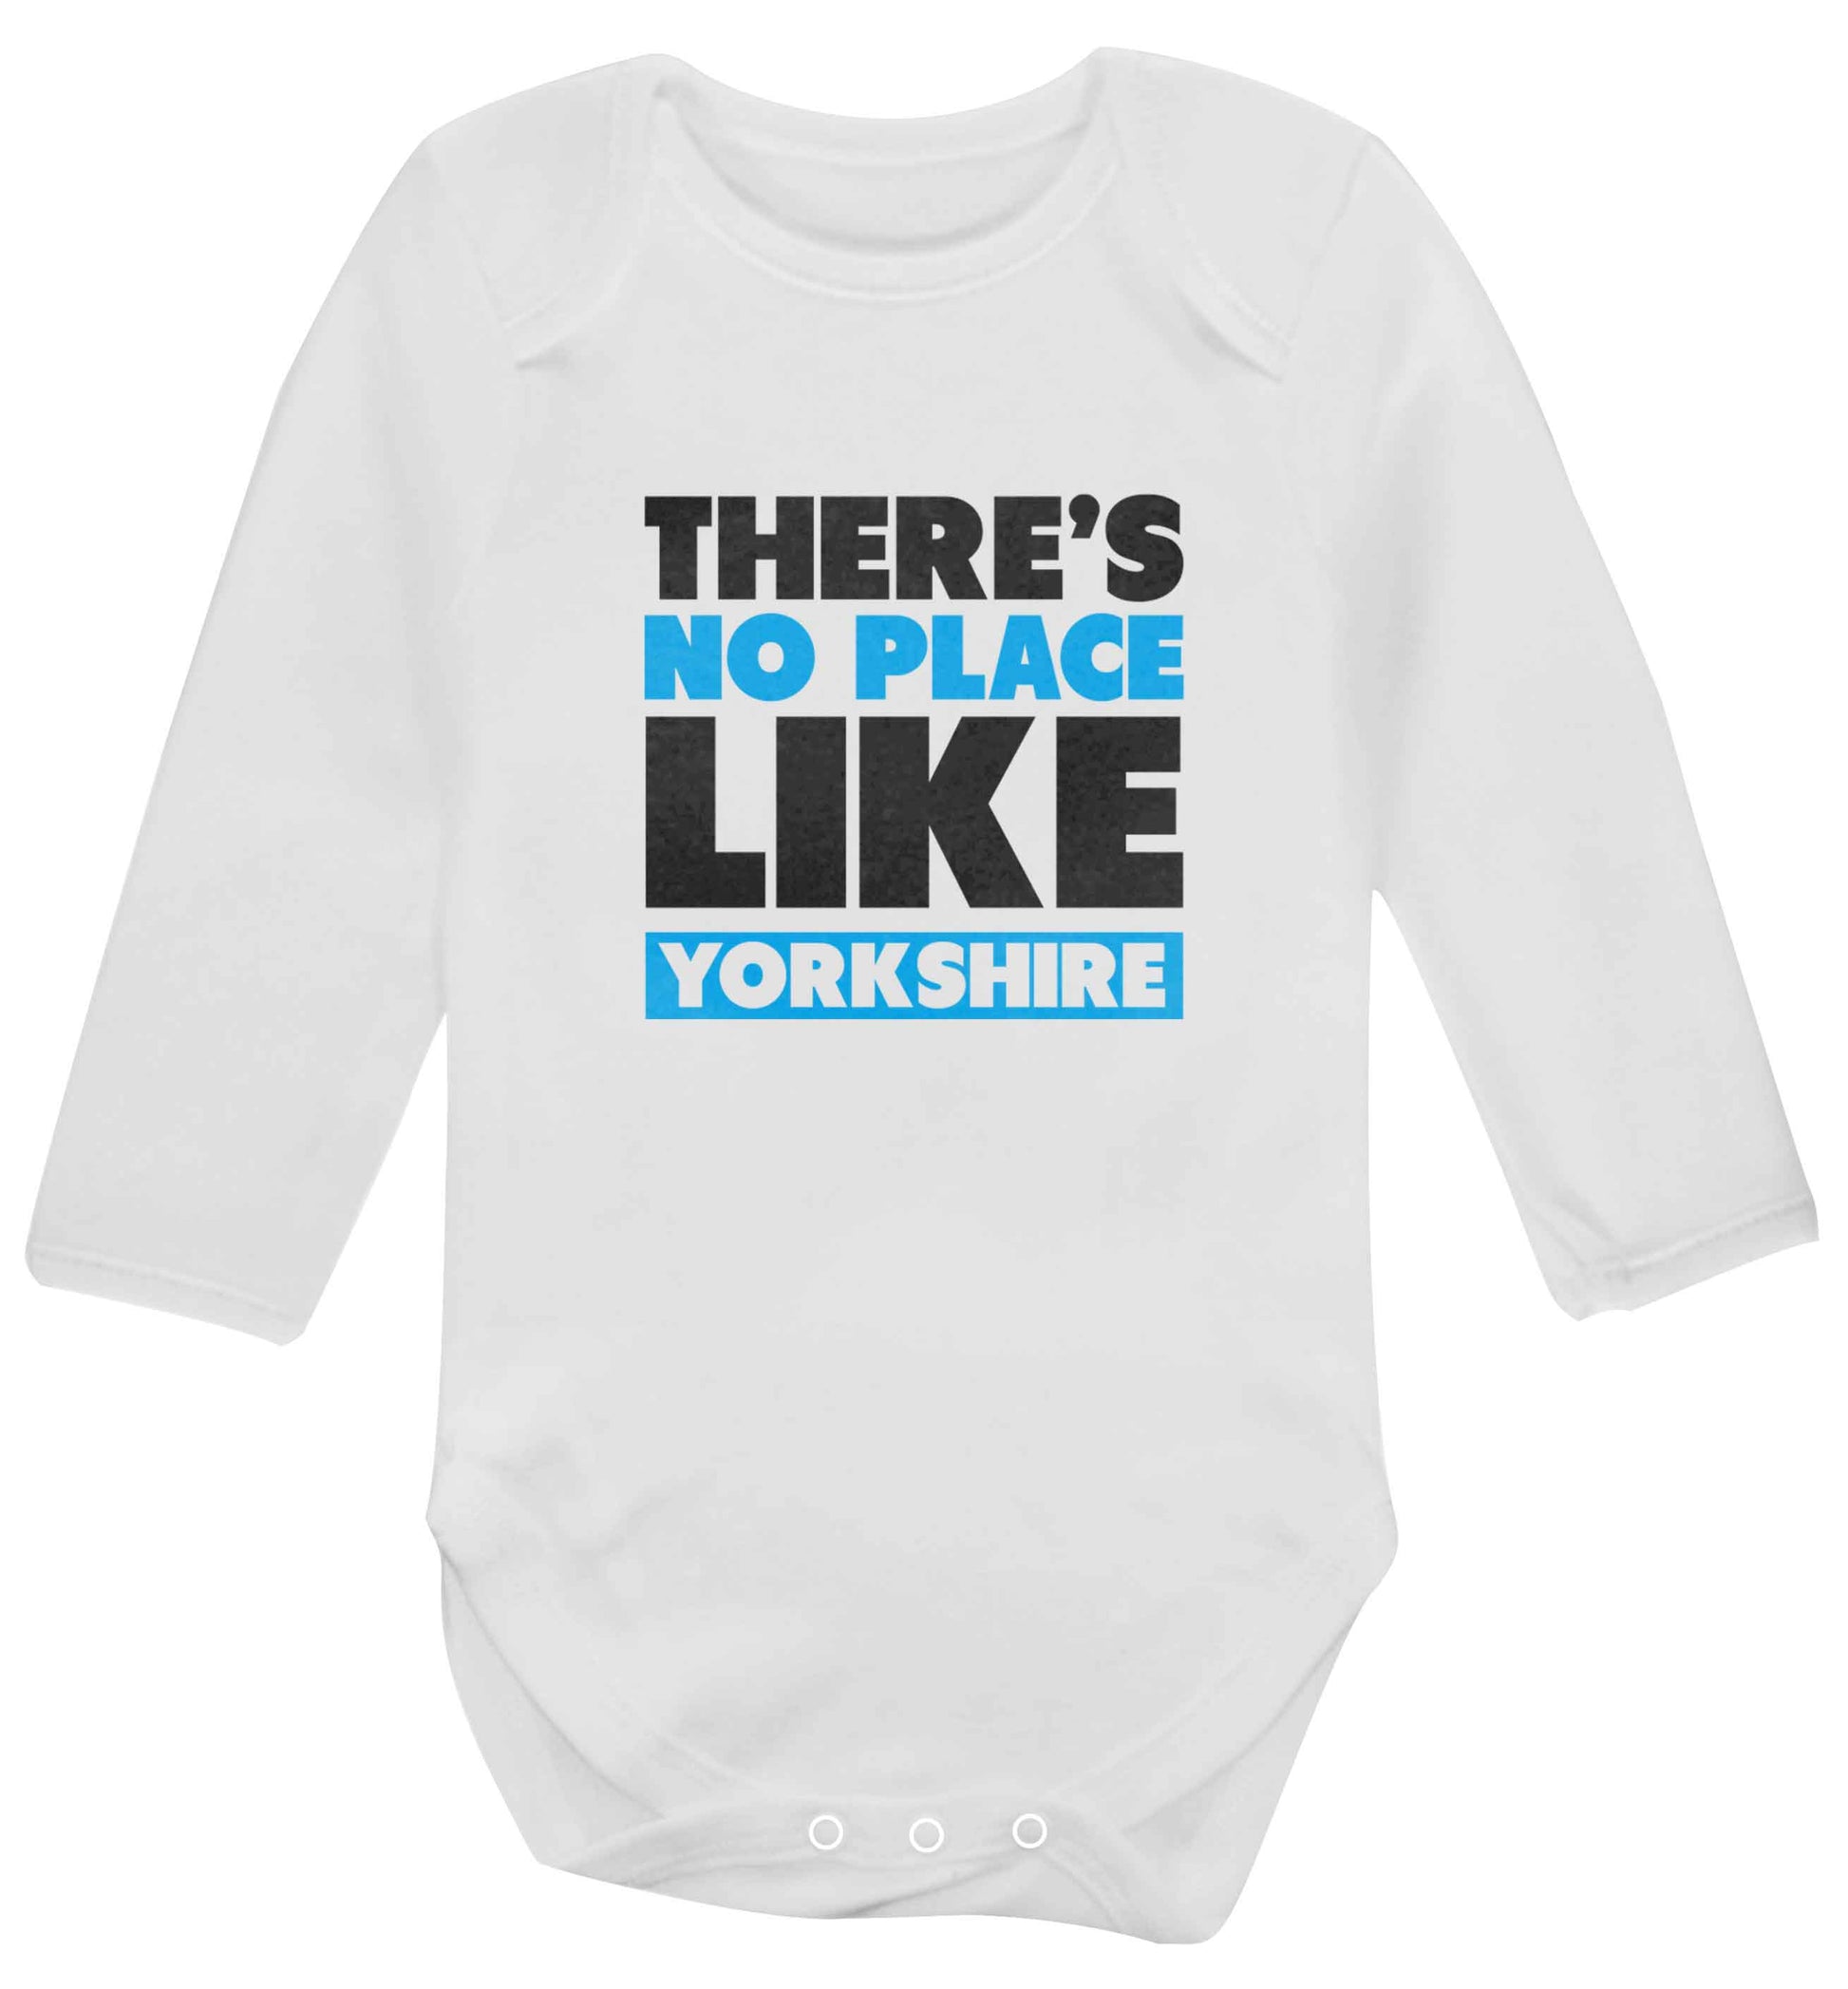 There's no place like Yorkshire baby vest long sleeved white 6-12 months